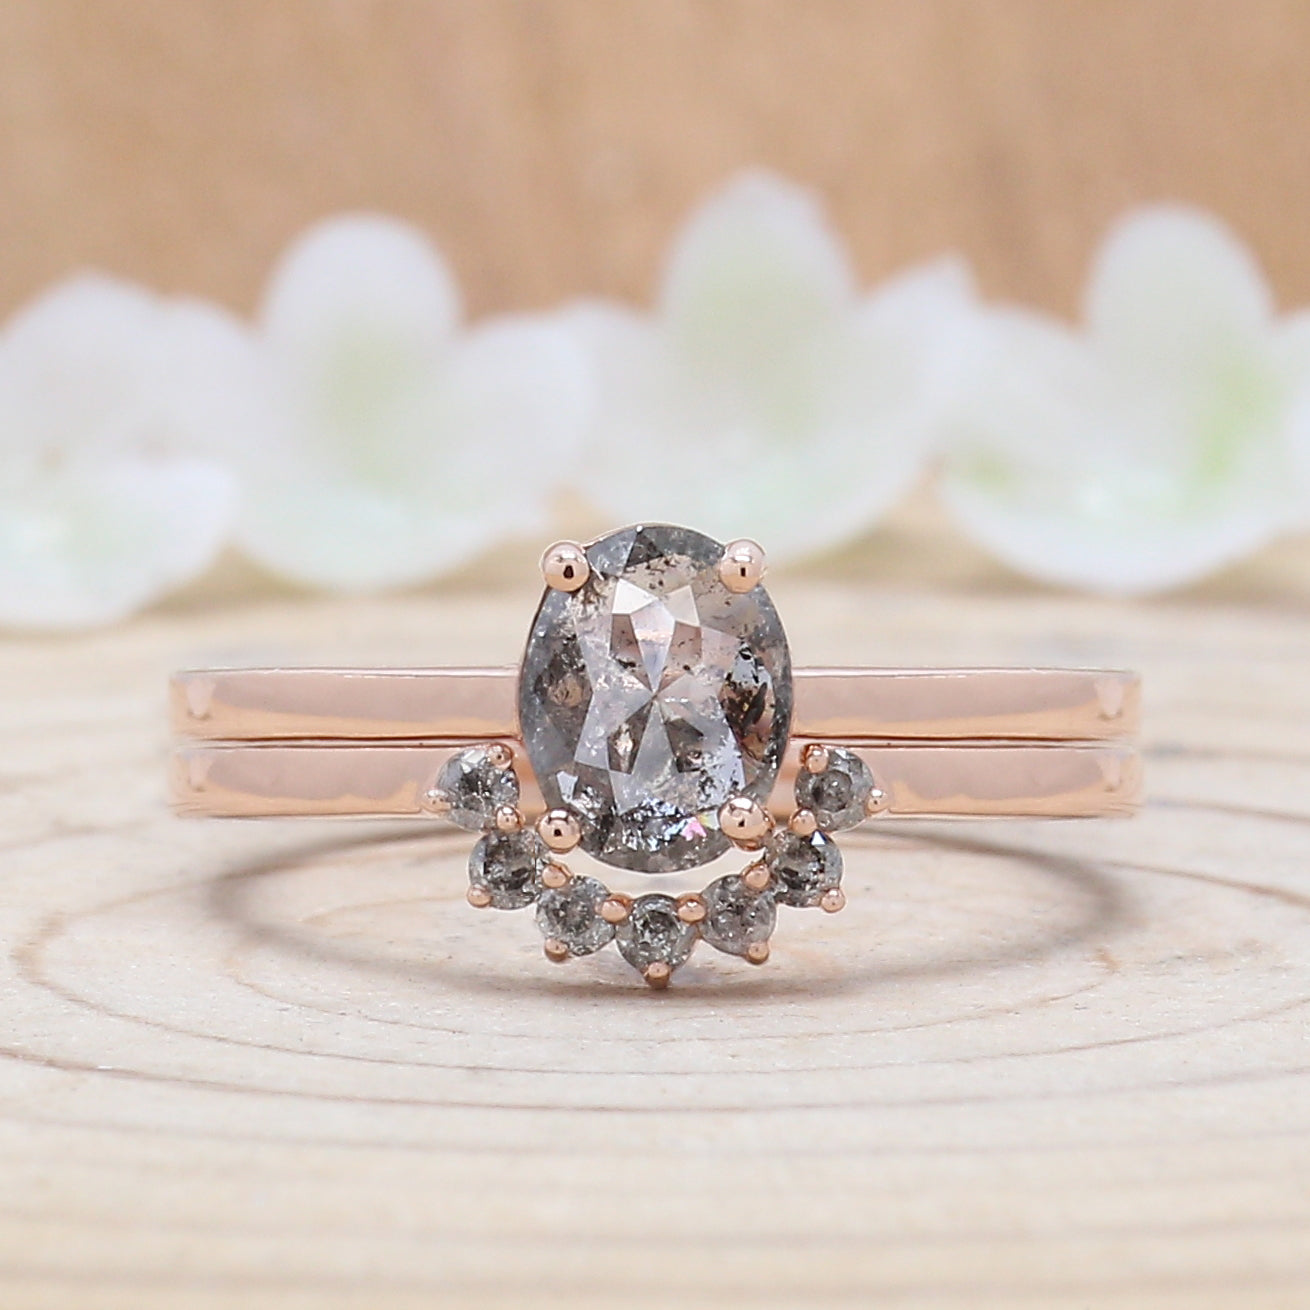 Oval Cut Salt And Pepper Diamond Ring 0.74 Ct 7.00 MM Oval Diamond Ring 14K Solid Rose Gold Silver Oval Engagement Ring Gift For Her QL1521